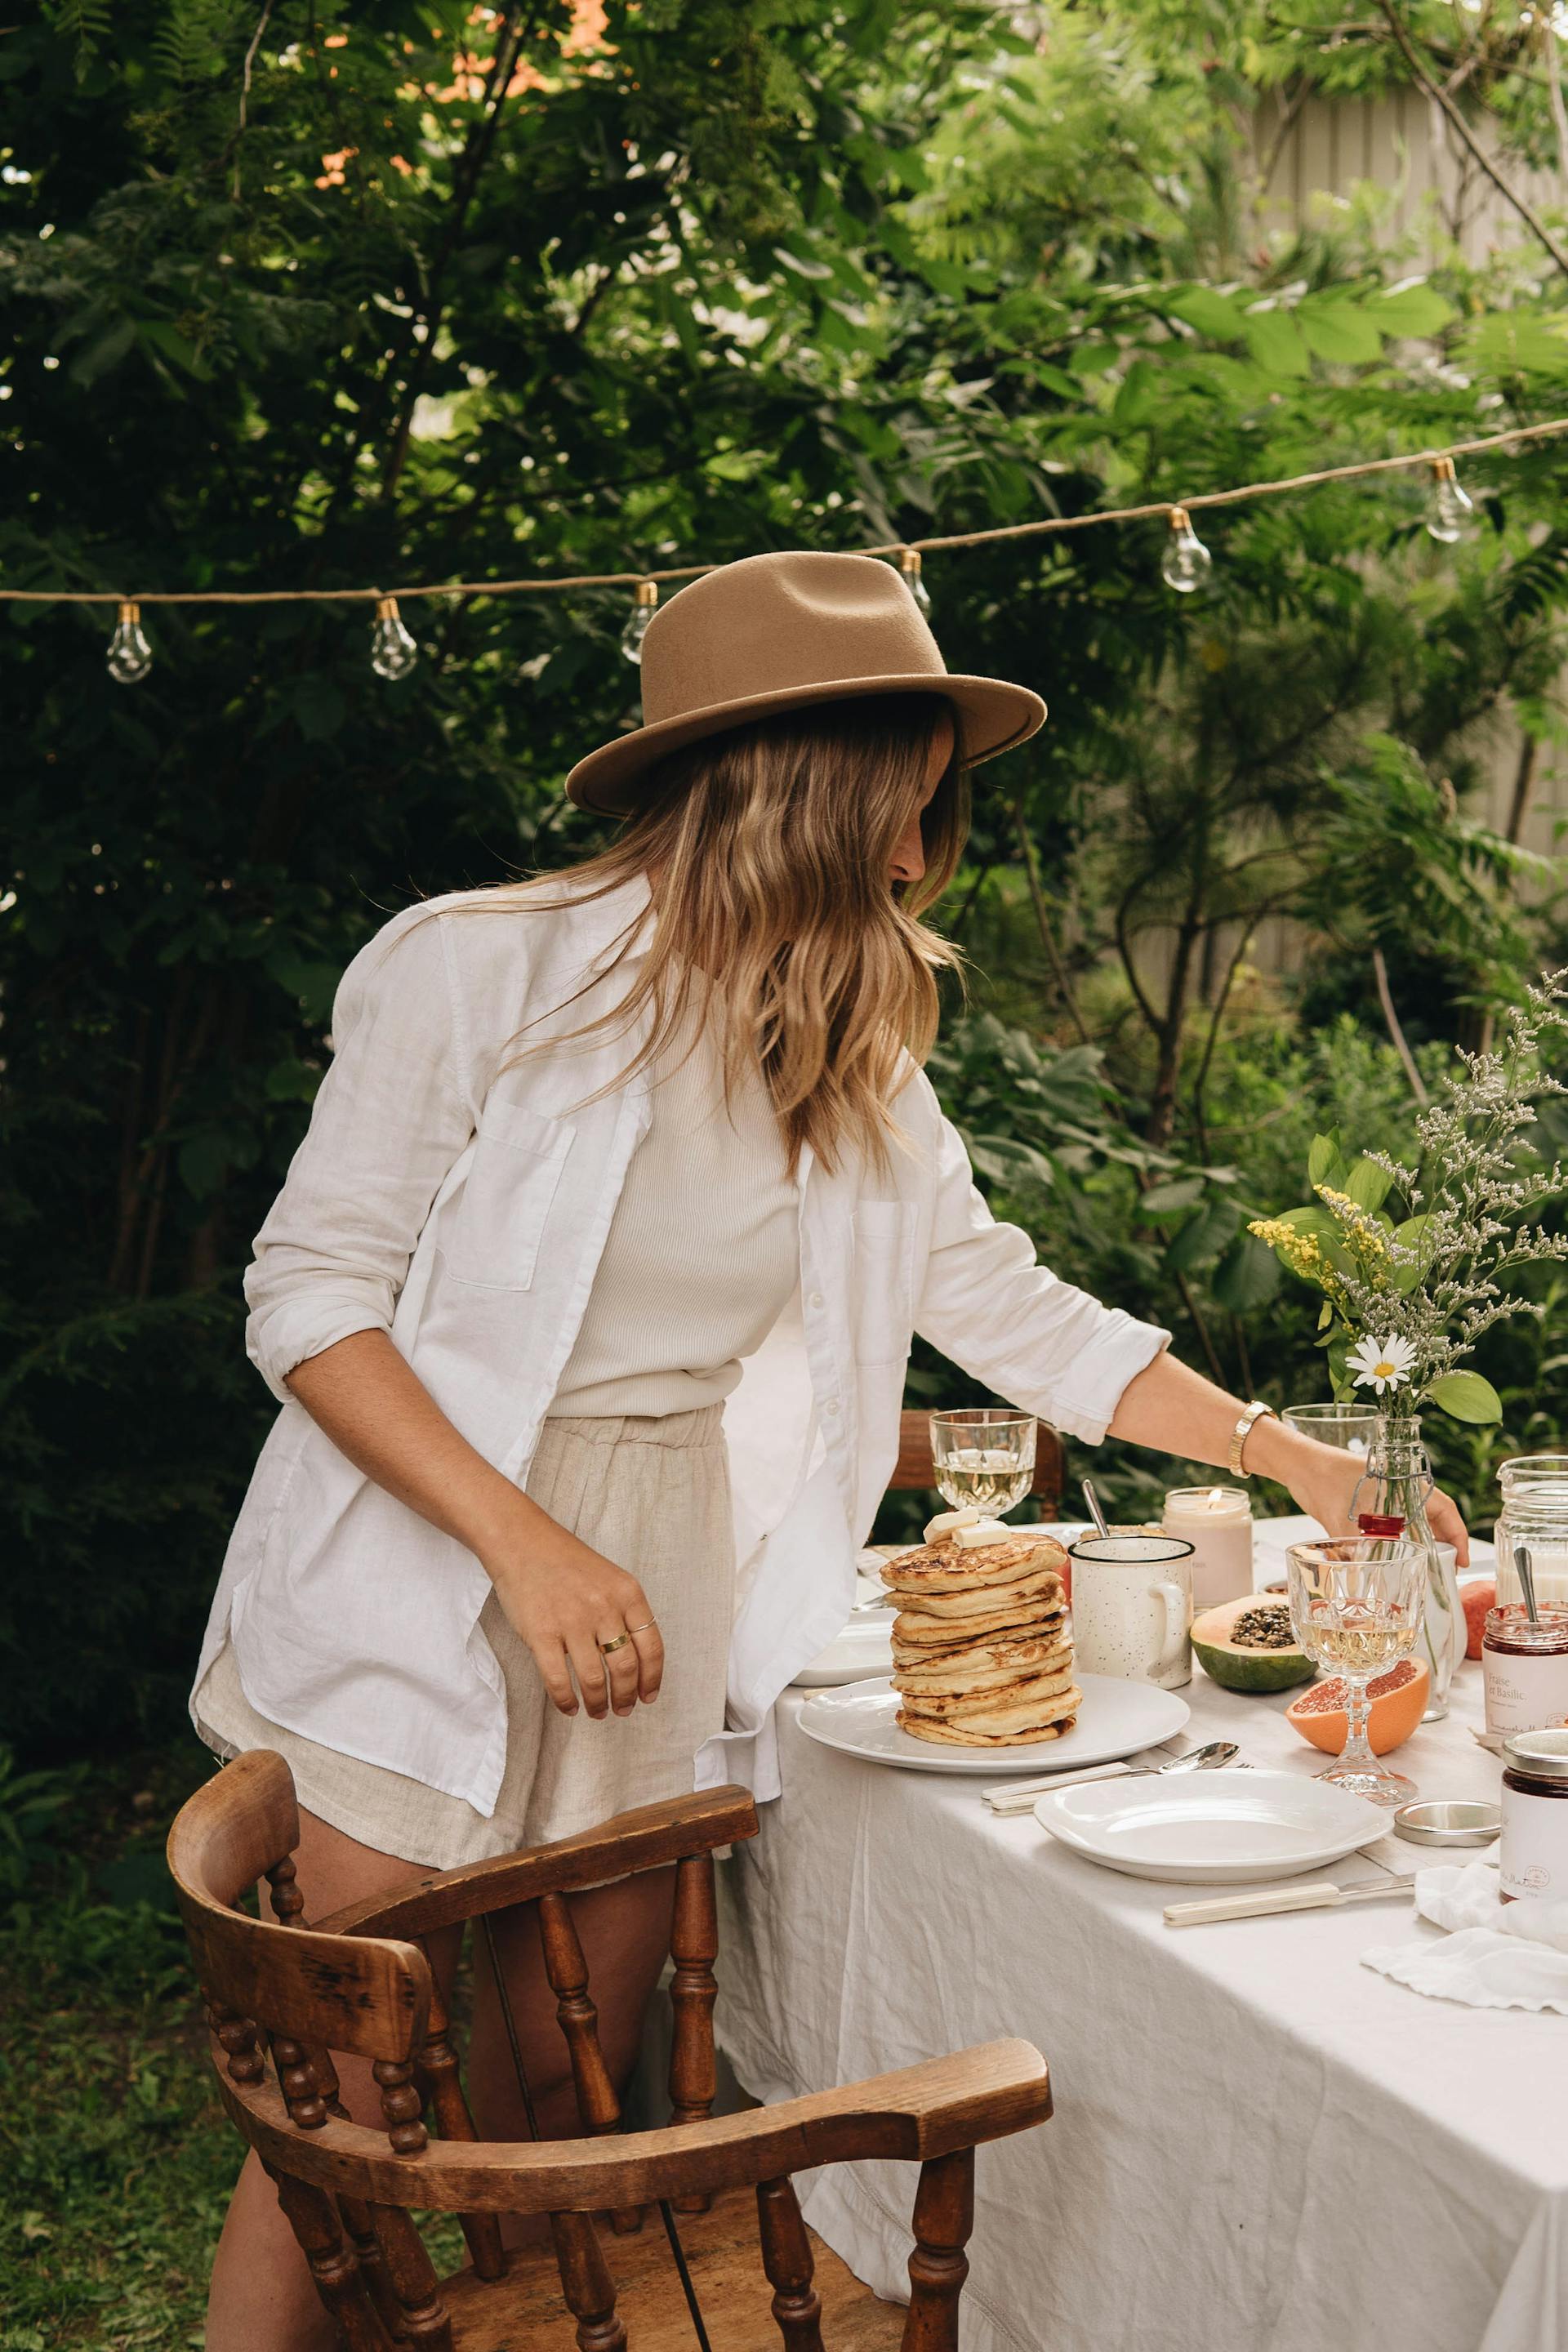 A woman setting a table | Source: Pexels